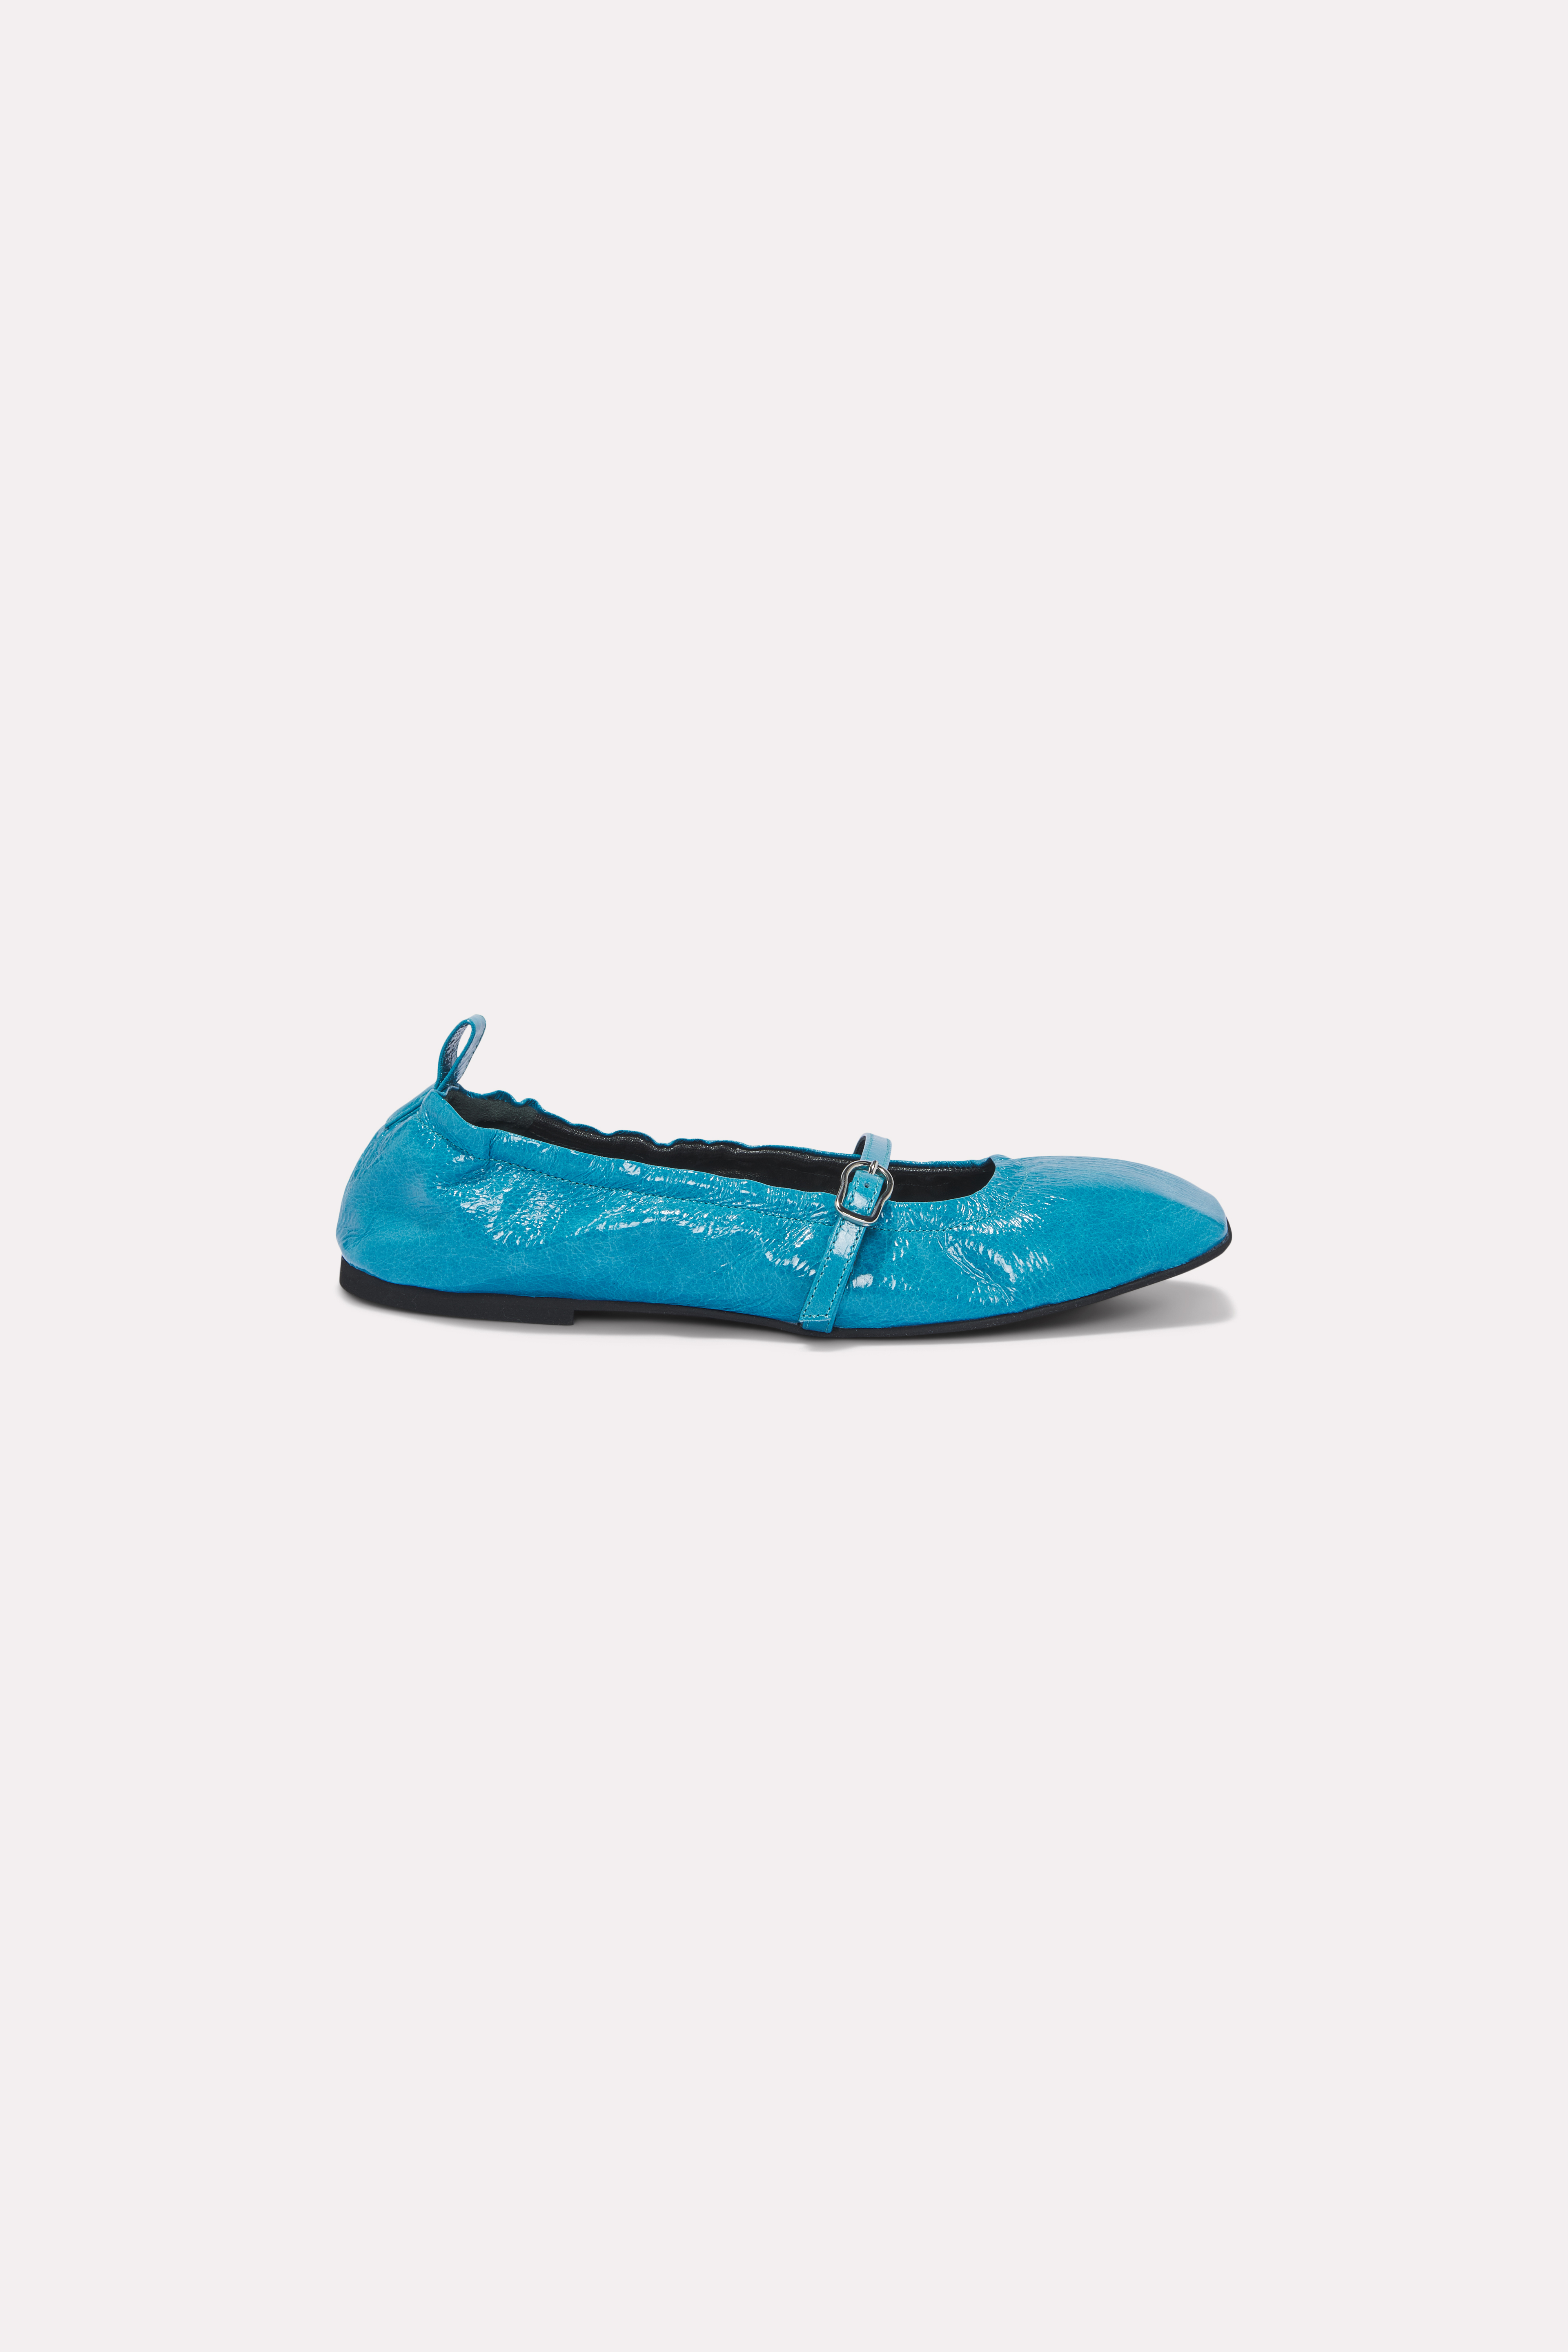 Dorothee Schumacher Square Toe Foldable Ballerinas With Buckle In Blue